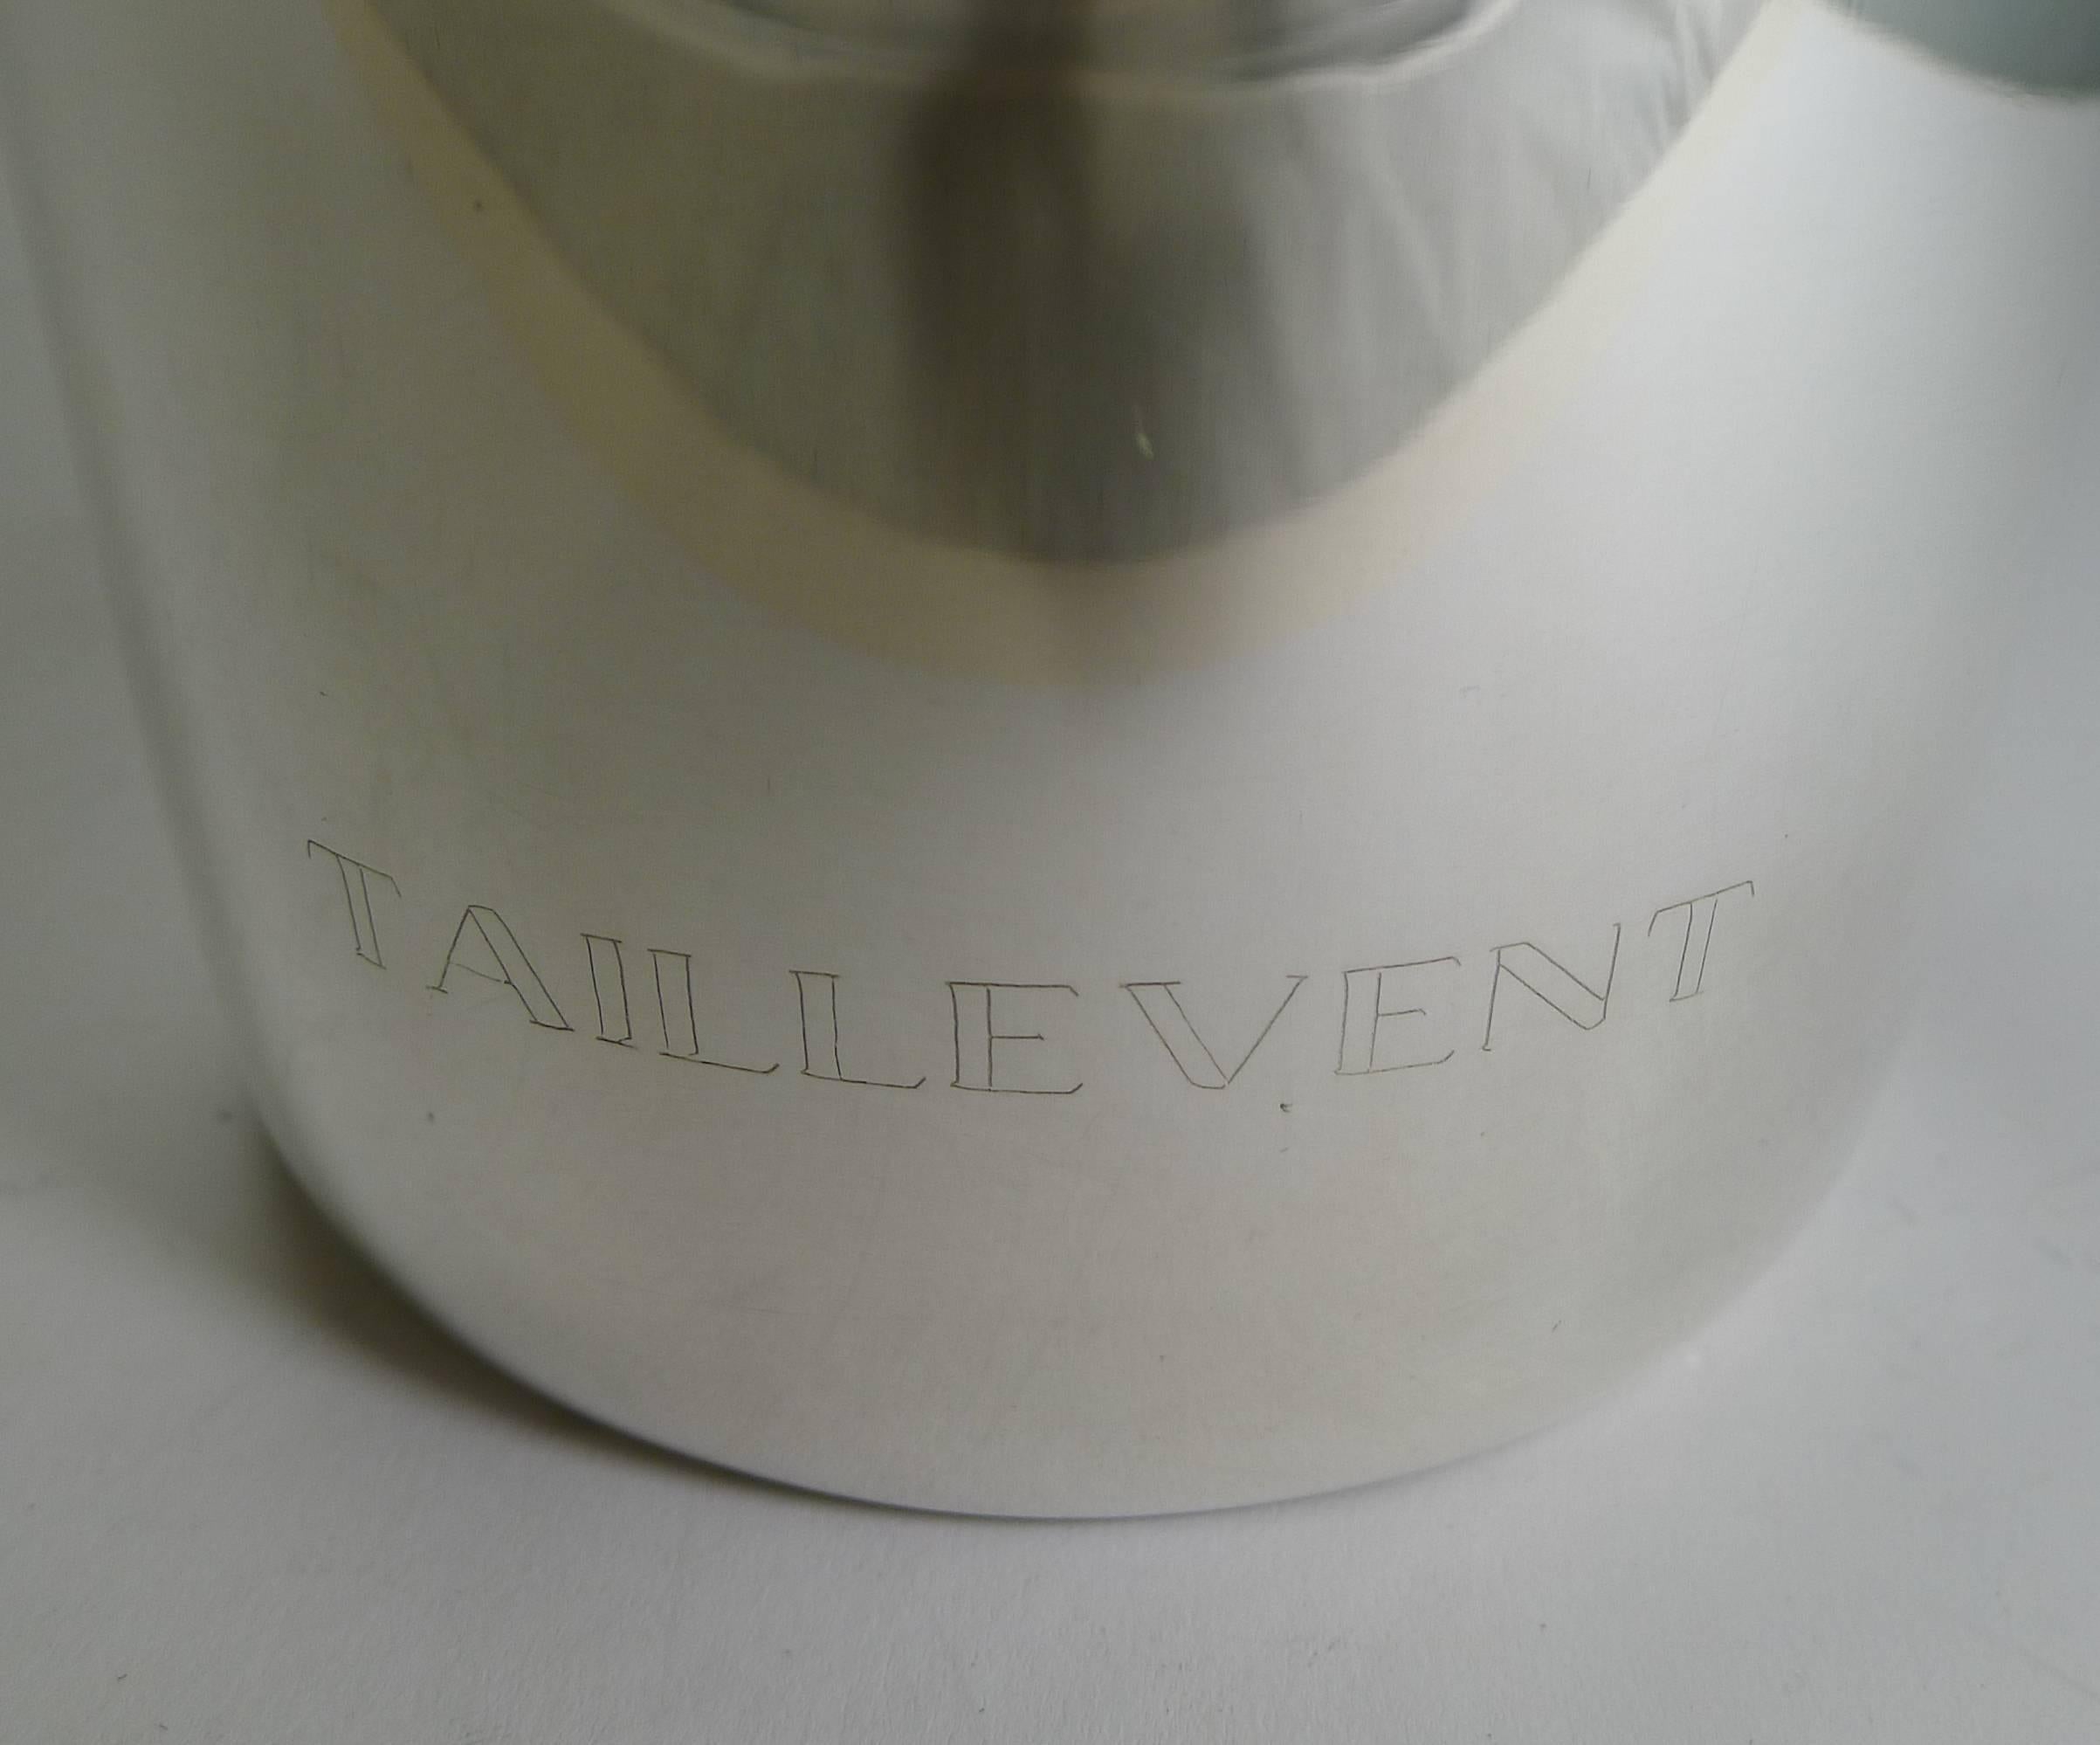 A magnificent and showy vintage silver plated champagne jacket from the world famous Taillevent restaurant in Paris opened in 1946 by André Vrinat in Paris’ 9th district.

This example has a removable gilded 